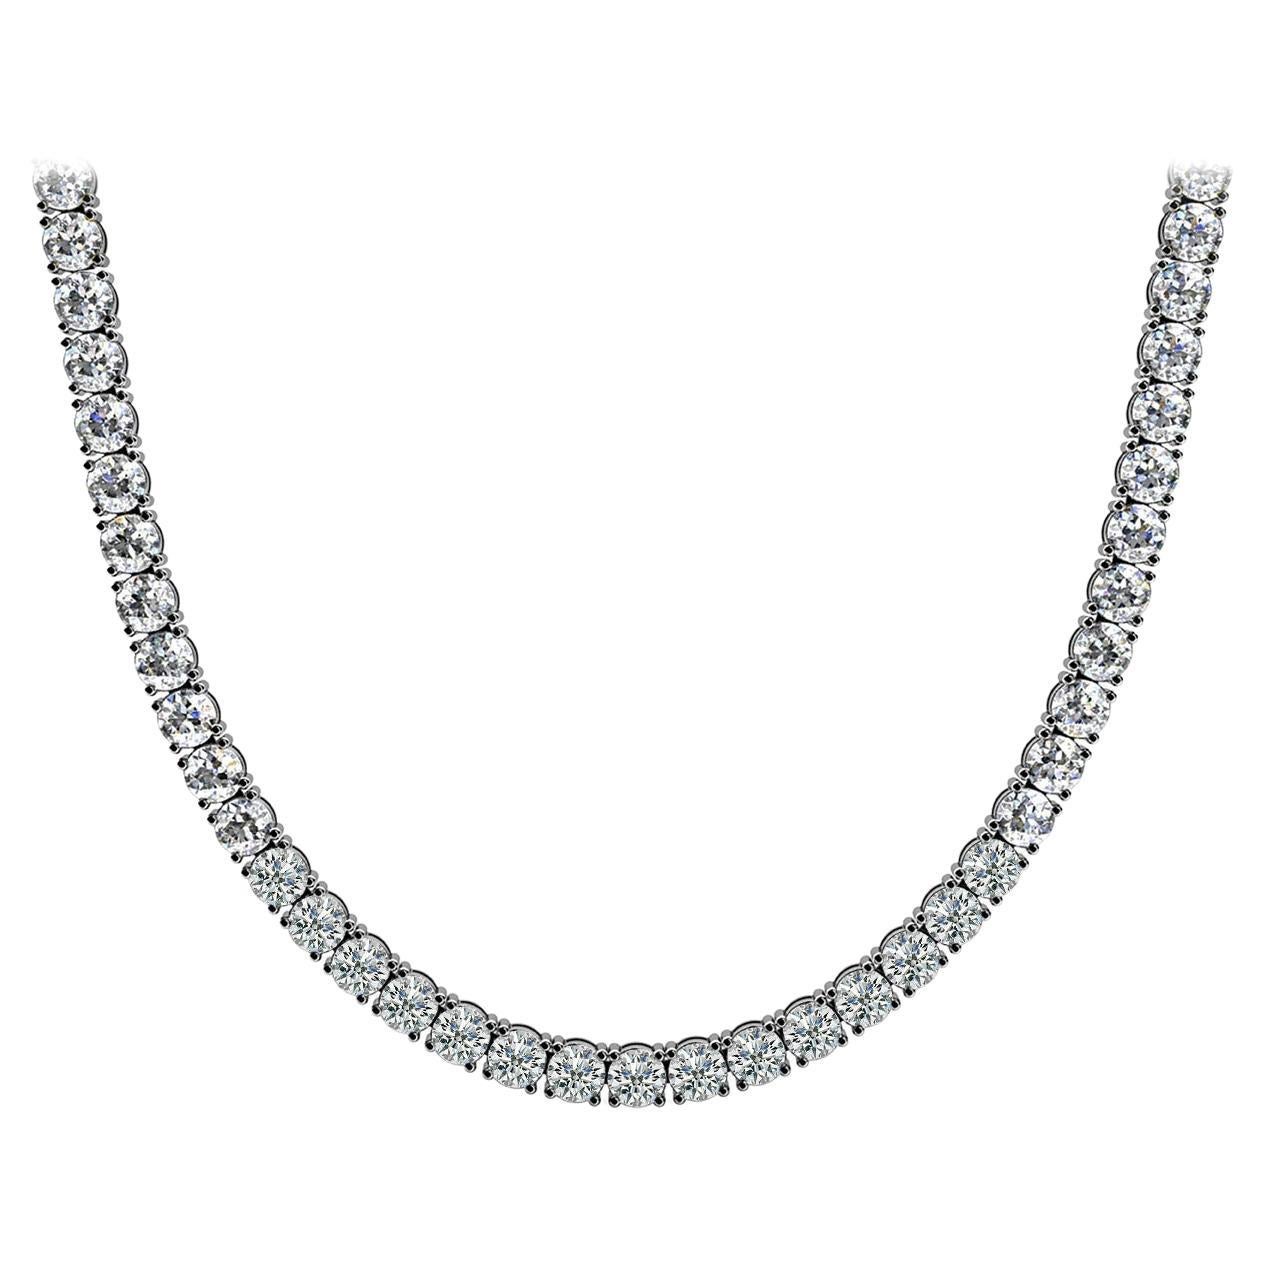 CHE 25 Carat Diamond Tennis Necklace in 14k White Gold 4 prong set BY MIKE NEKTA For Sale